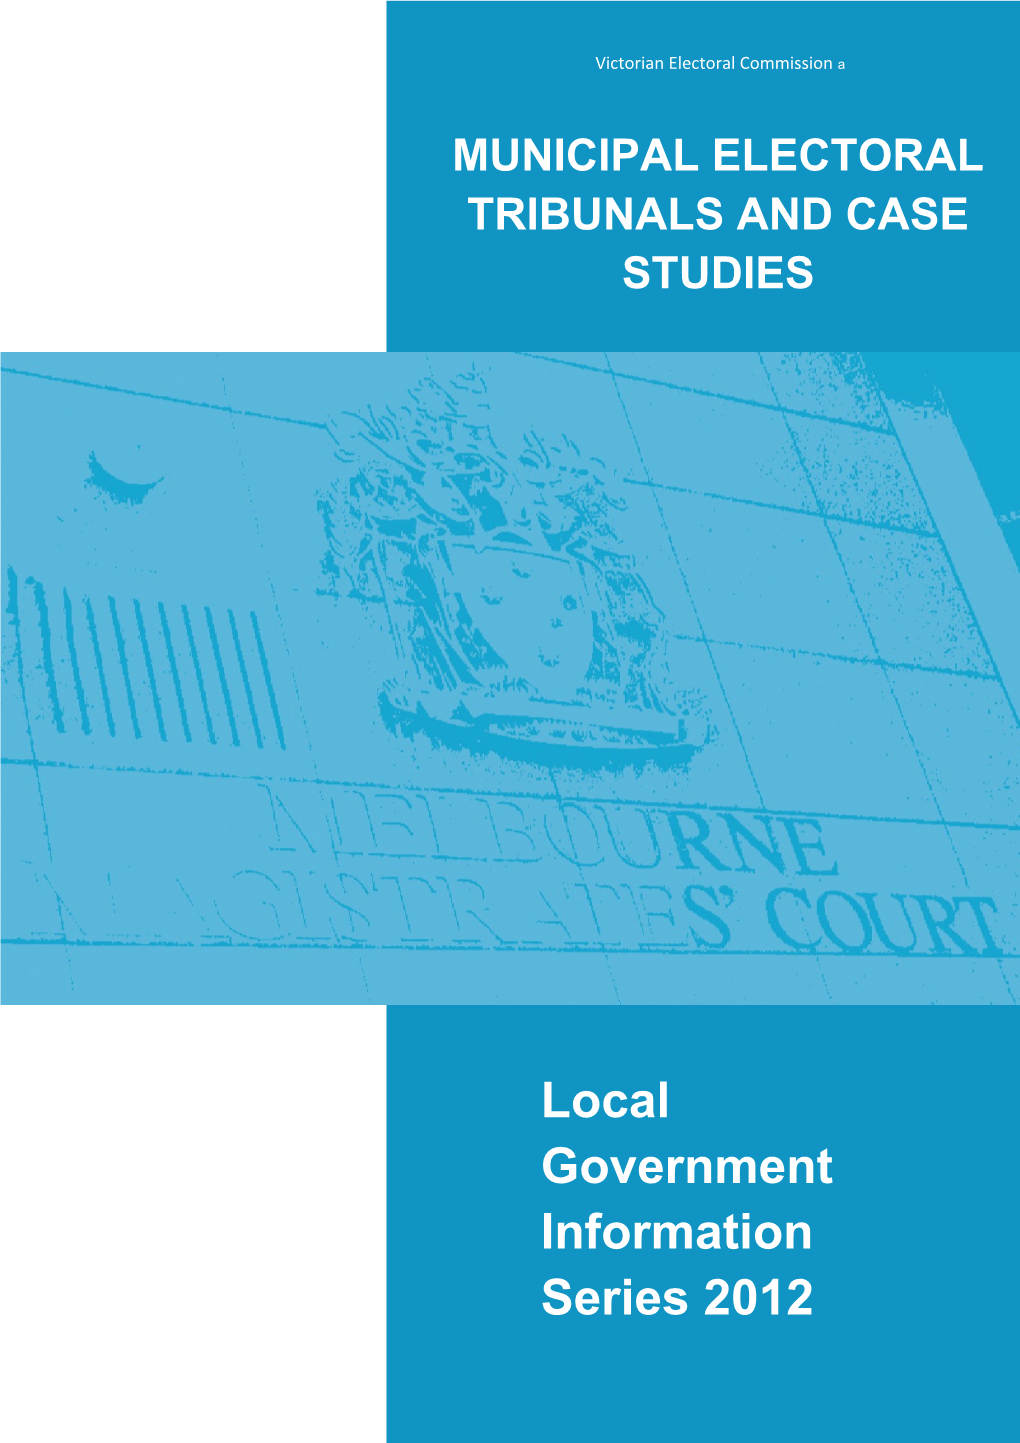 The Purpose of This Publication Is to Provide Examples of How Municipal Electoral Tribunals